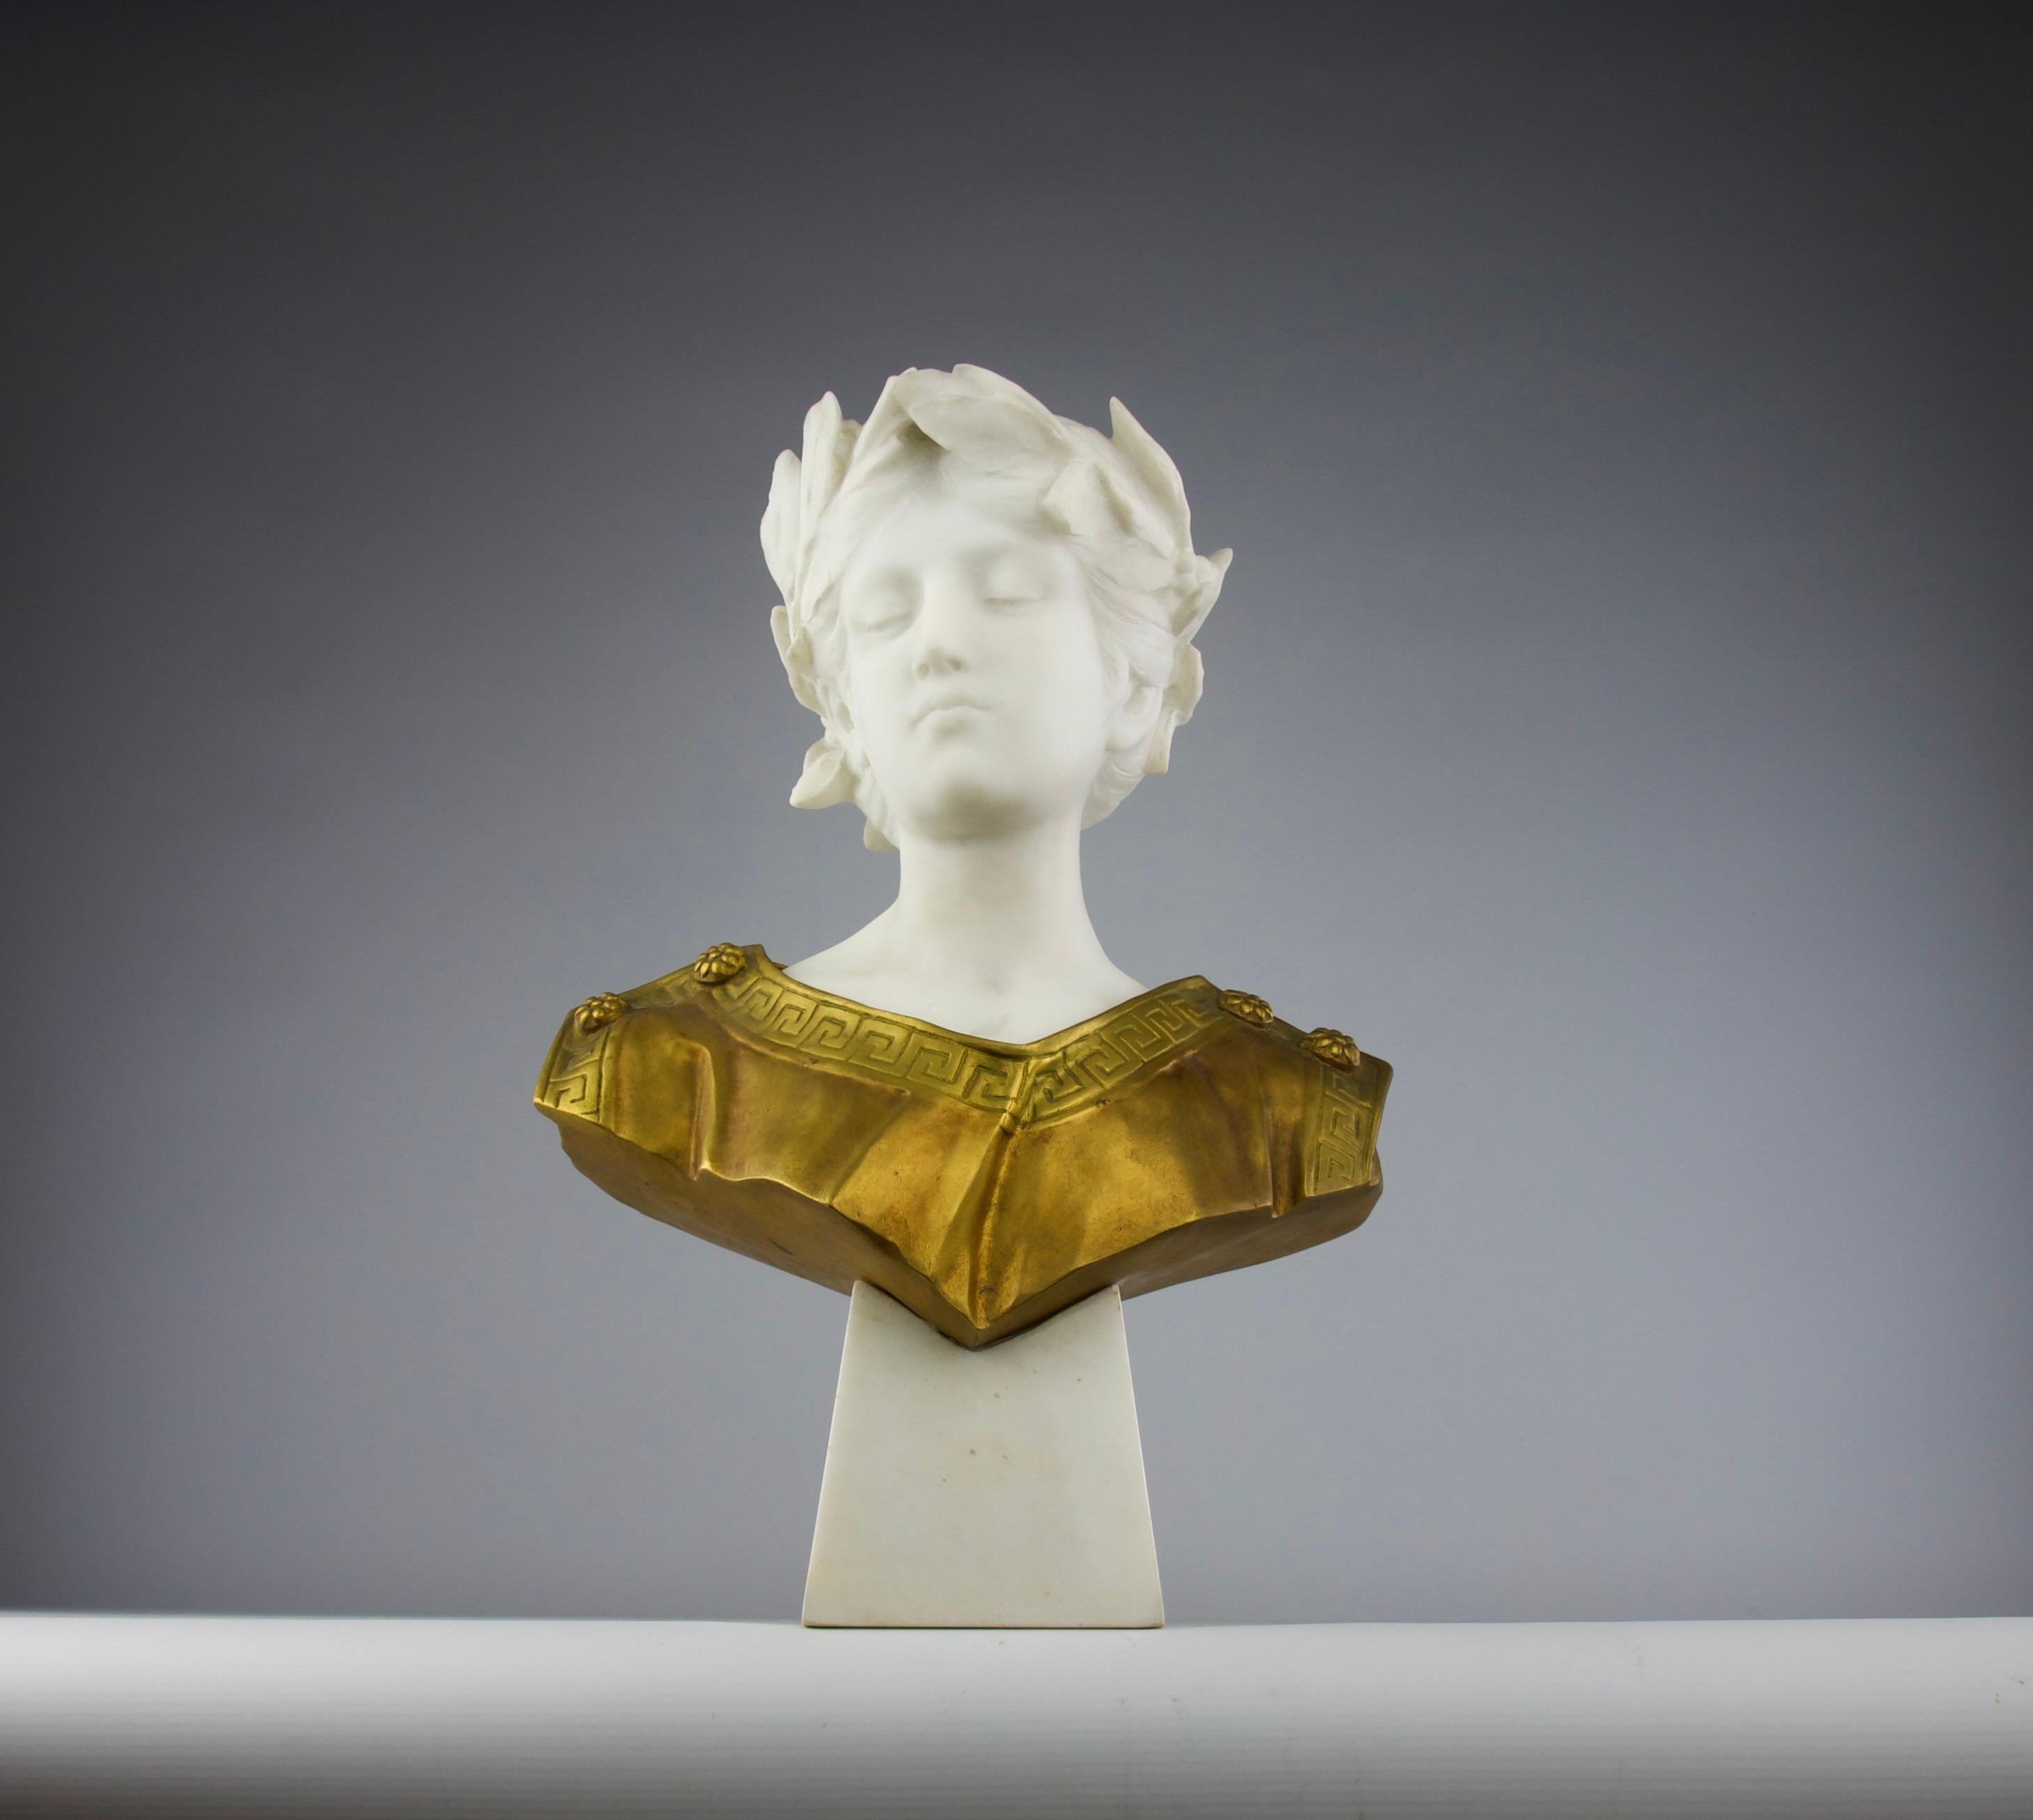 Superb marble and gilt bronze bust representing a young emperor with his robe and laurel wreath. Italy early 20th century, of the Romantic style. 

Signed A. Fagioli.

Dimensions in cm ( H x L x l ) : 42 x 28 x 20.5

Secure shipping.